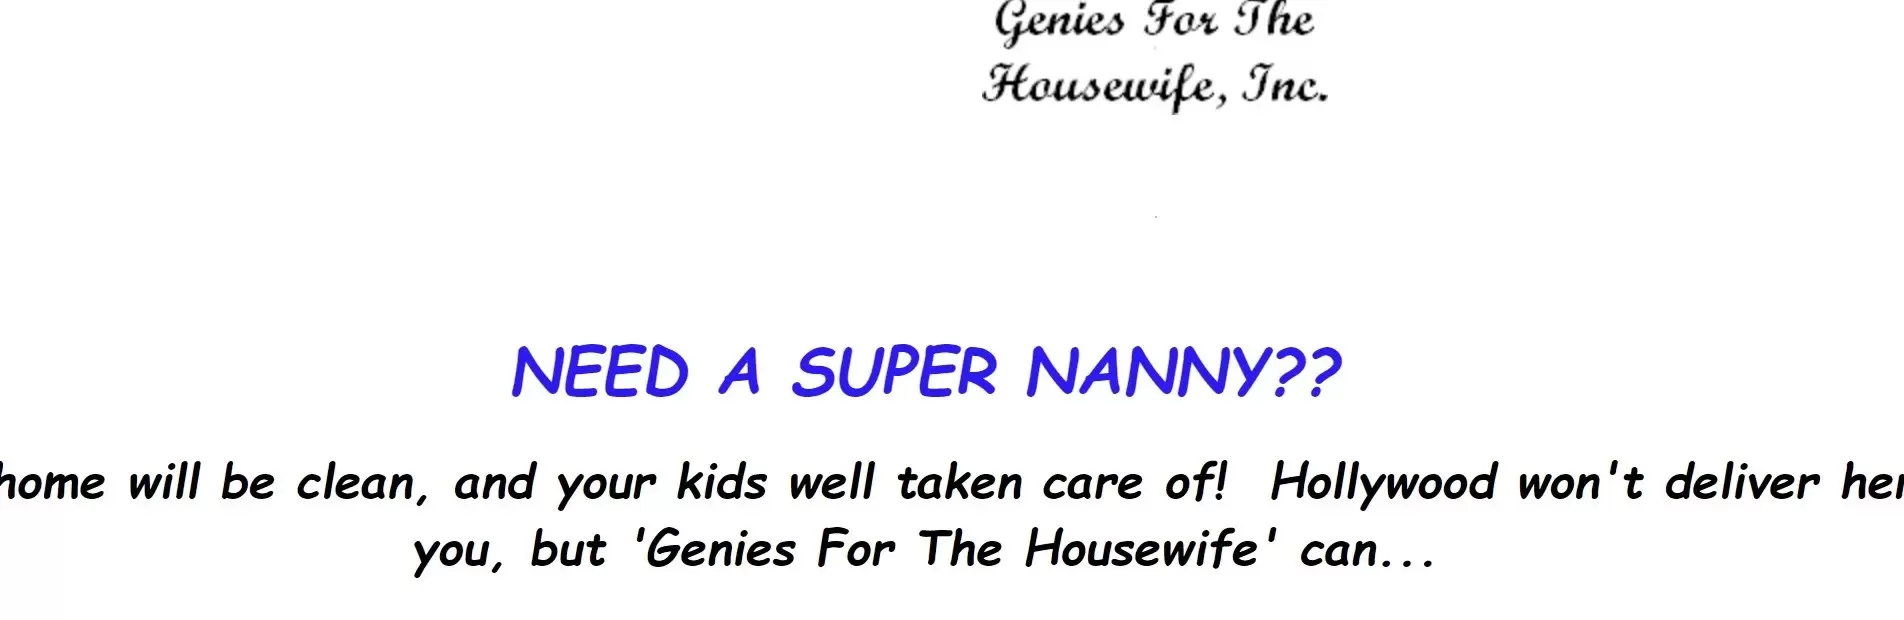 Genies for the Housewife company profile and reviews